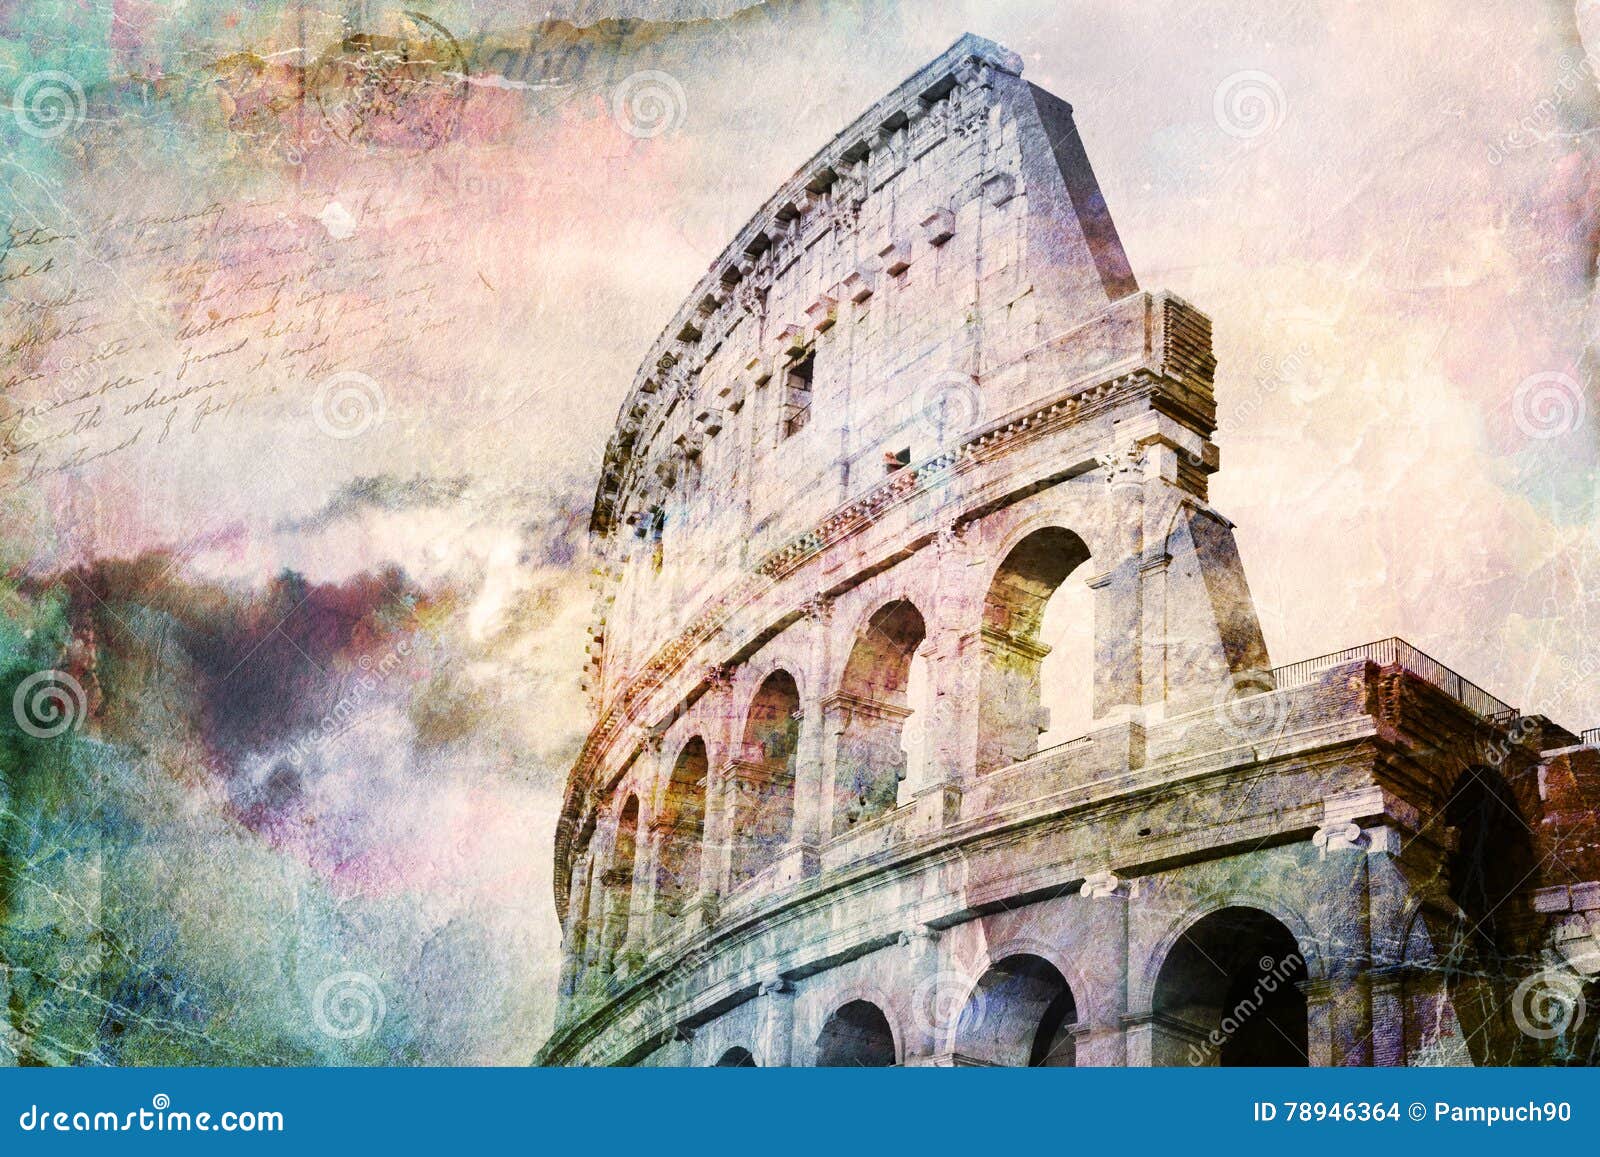 https://thumbs.dreamstime.com/z/abstract-digital-art-colosseum-rome-old-paper-postcard-high-resolution-printable-canvas-78946364.jpg